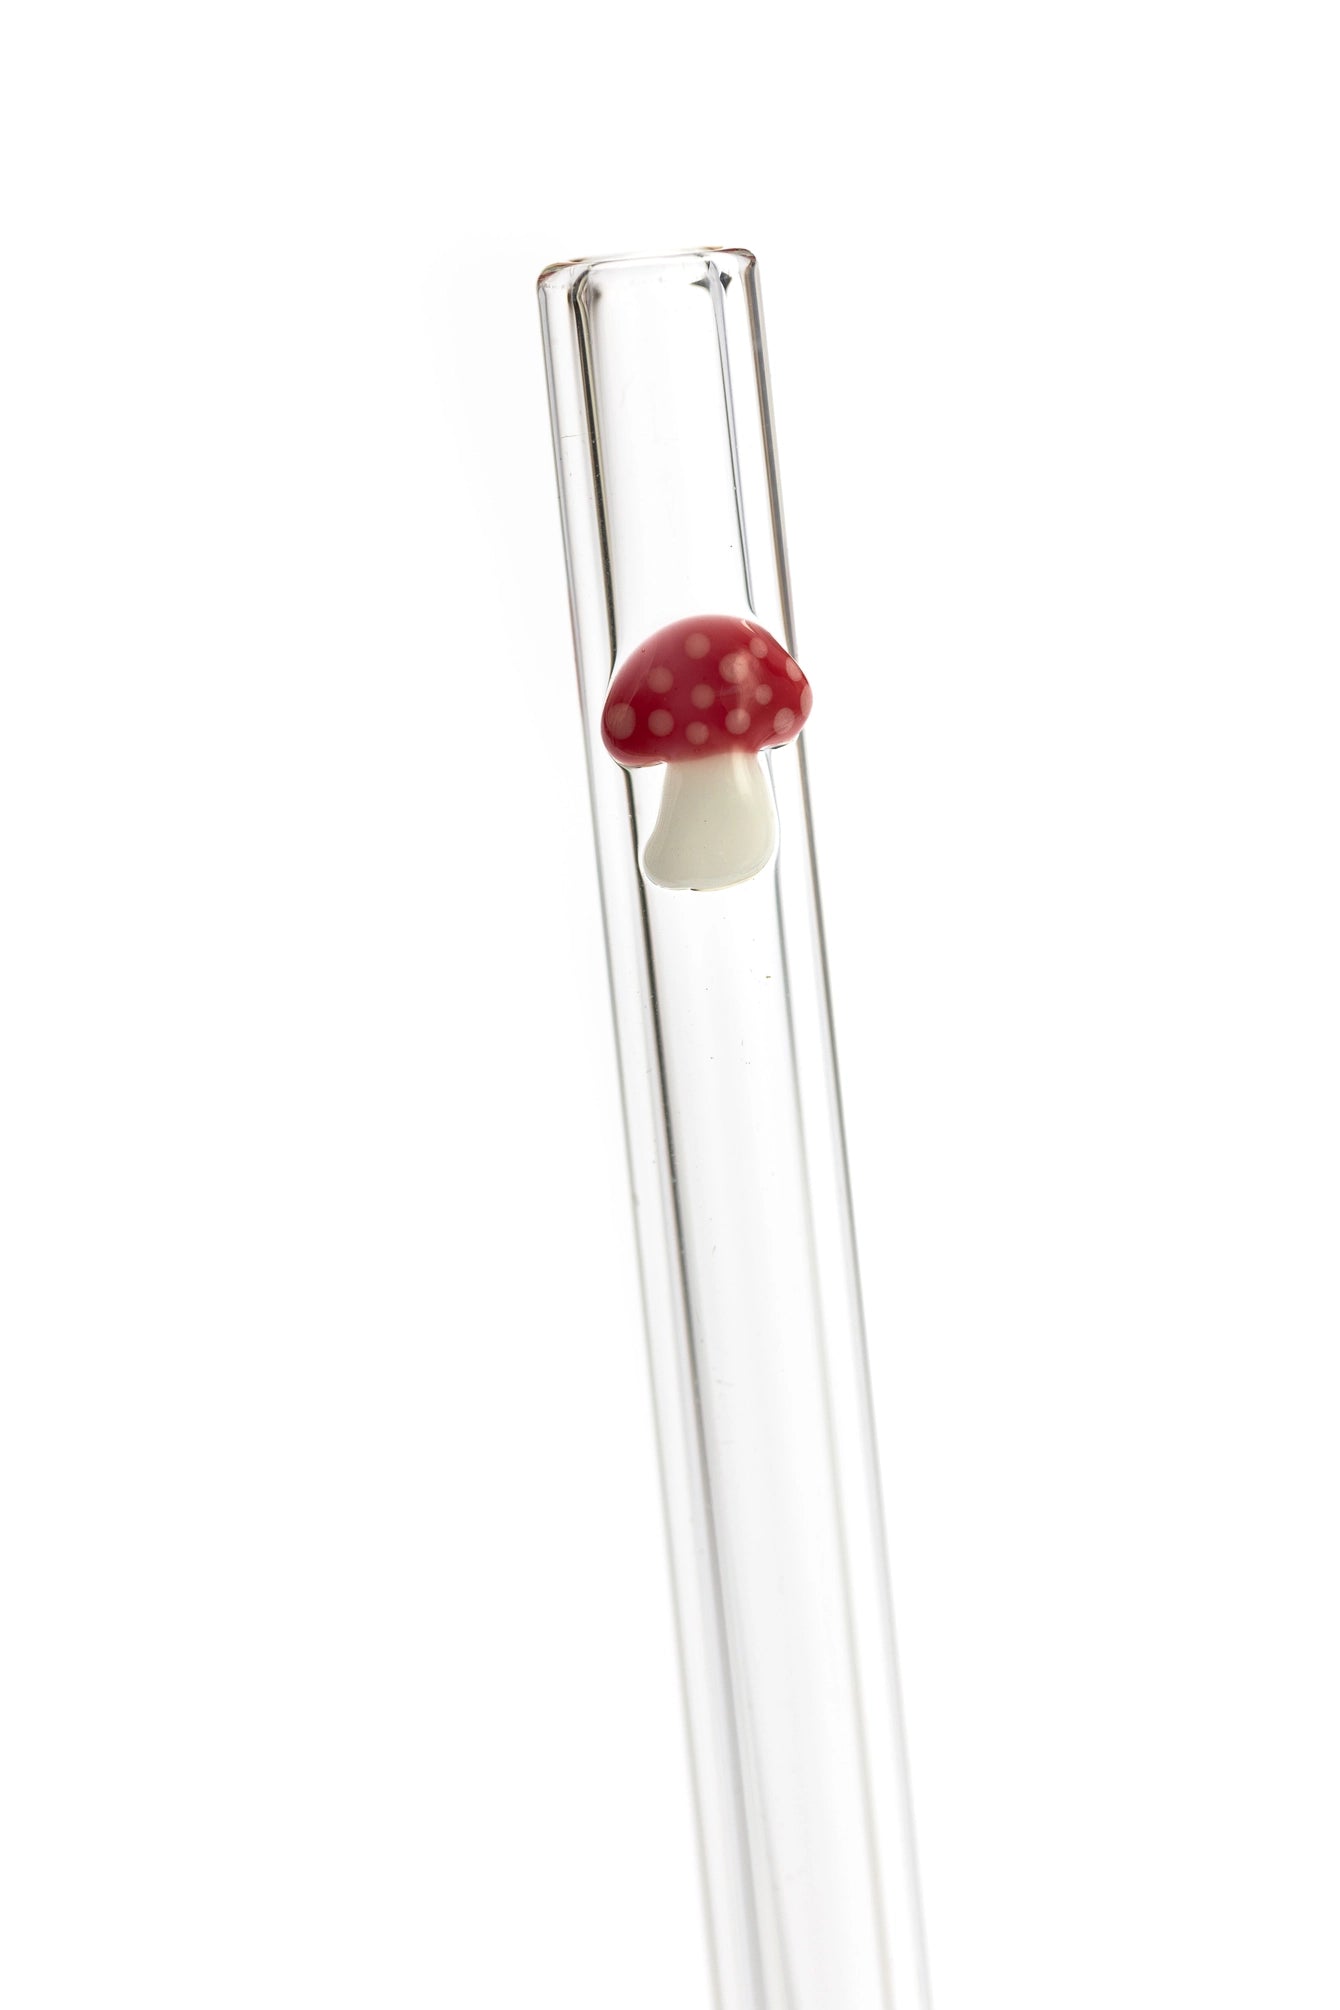 Chunky Smoothie Glass Straw with Cleaning Brush - Mushroom